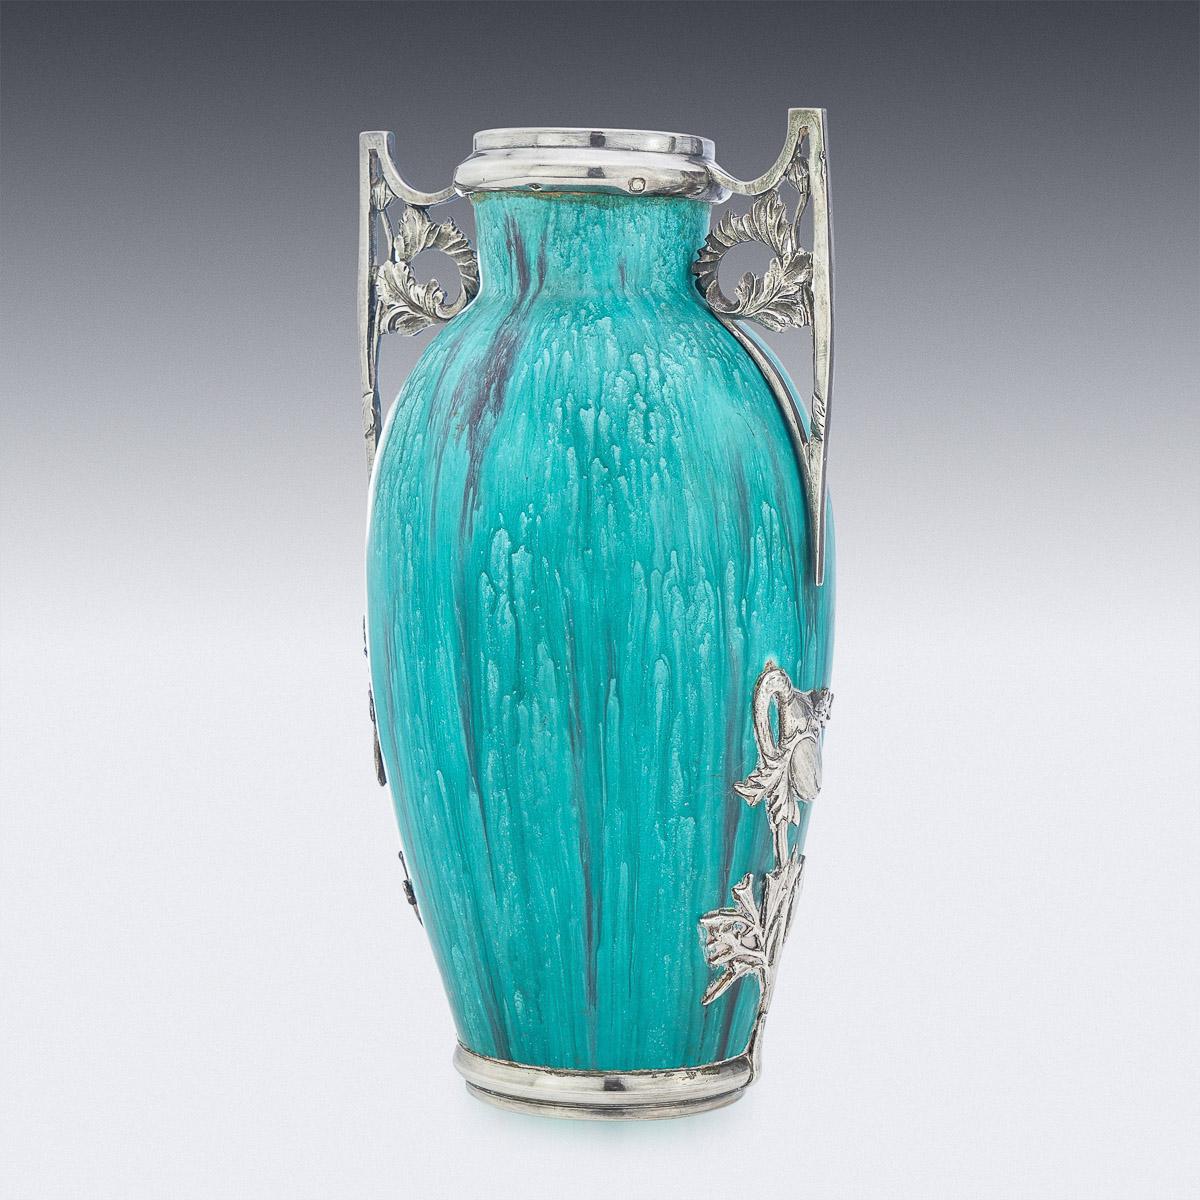 20th Century French silver mounted flambé glaze pottery vases, the neck and the circular foot are mounted with solid silver mounts featuring Art Nouveau decoration with shaped handles and flowers, mounted with a lovely aquamarine flambé glazed